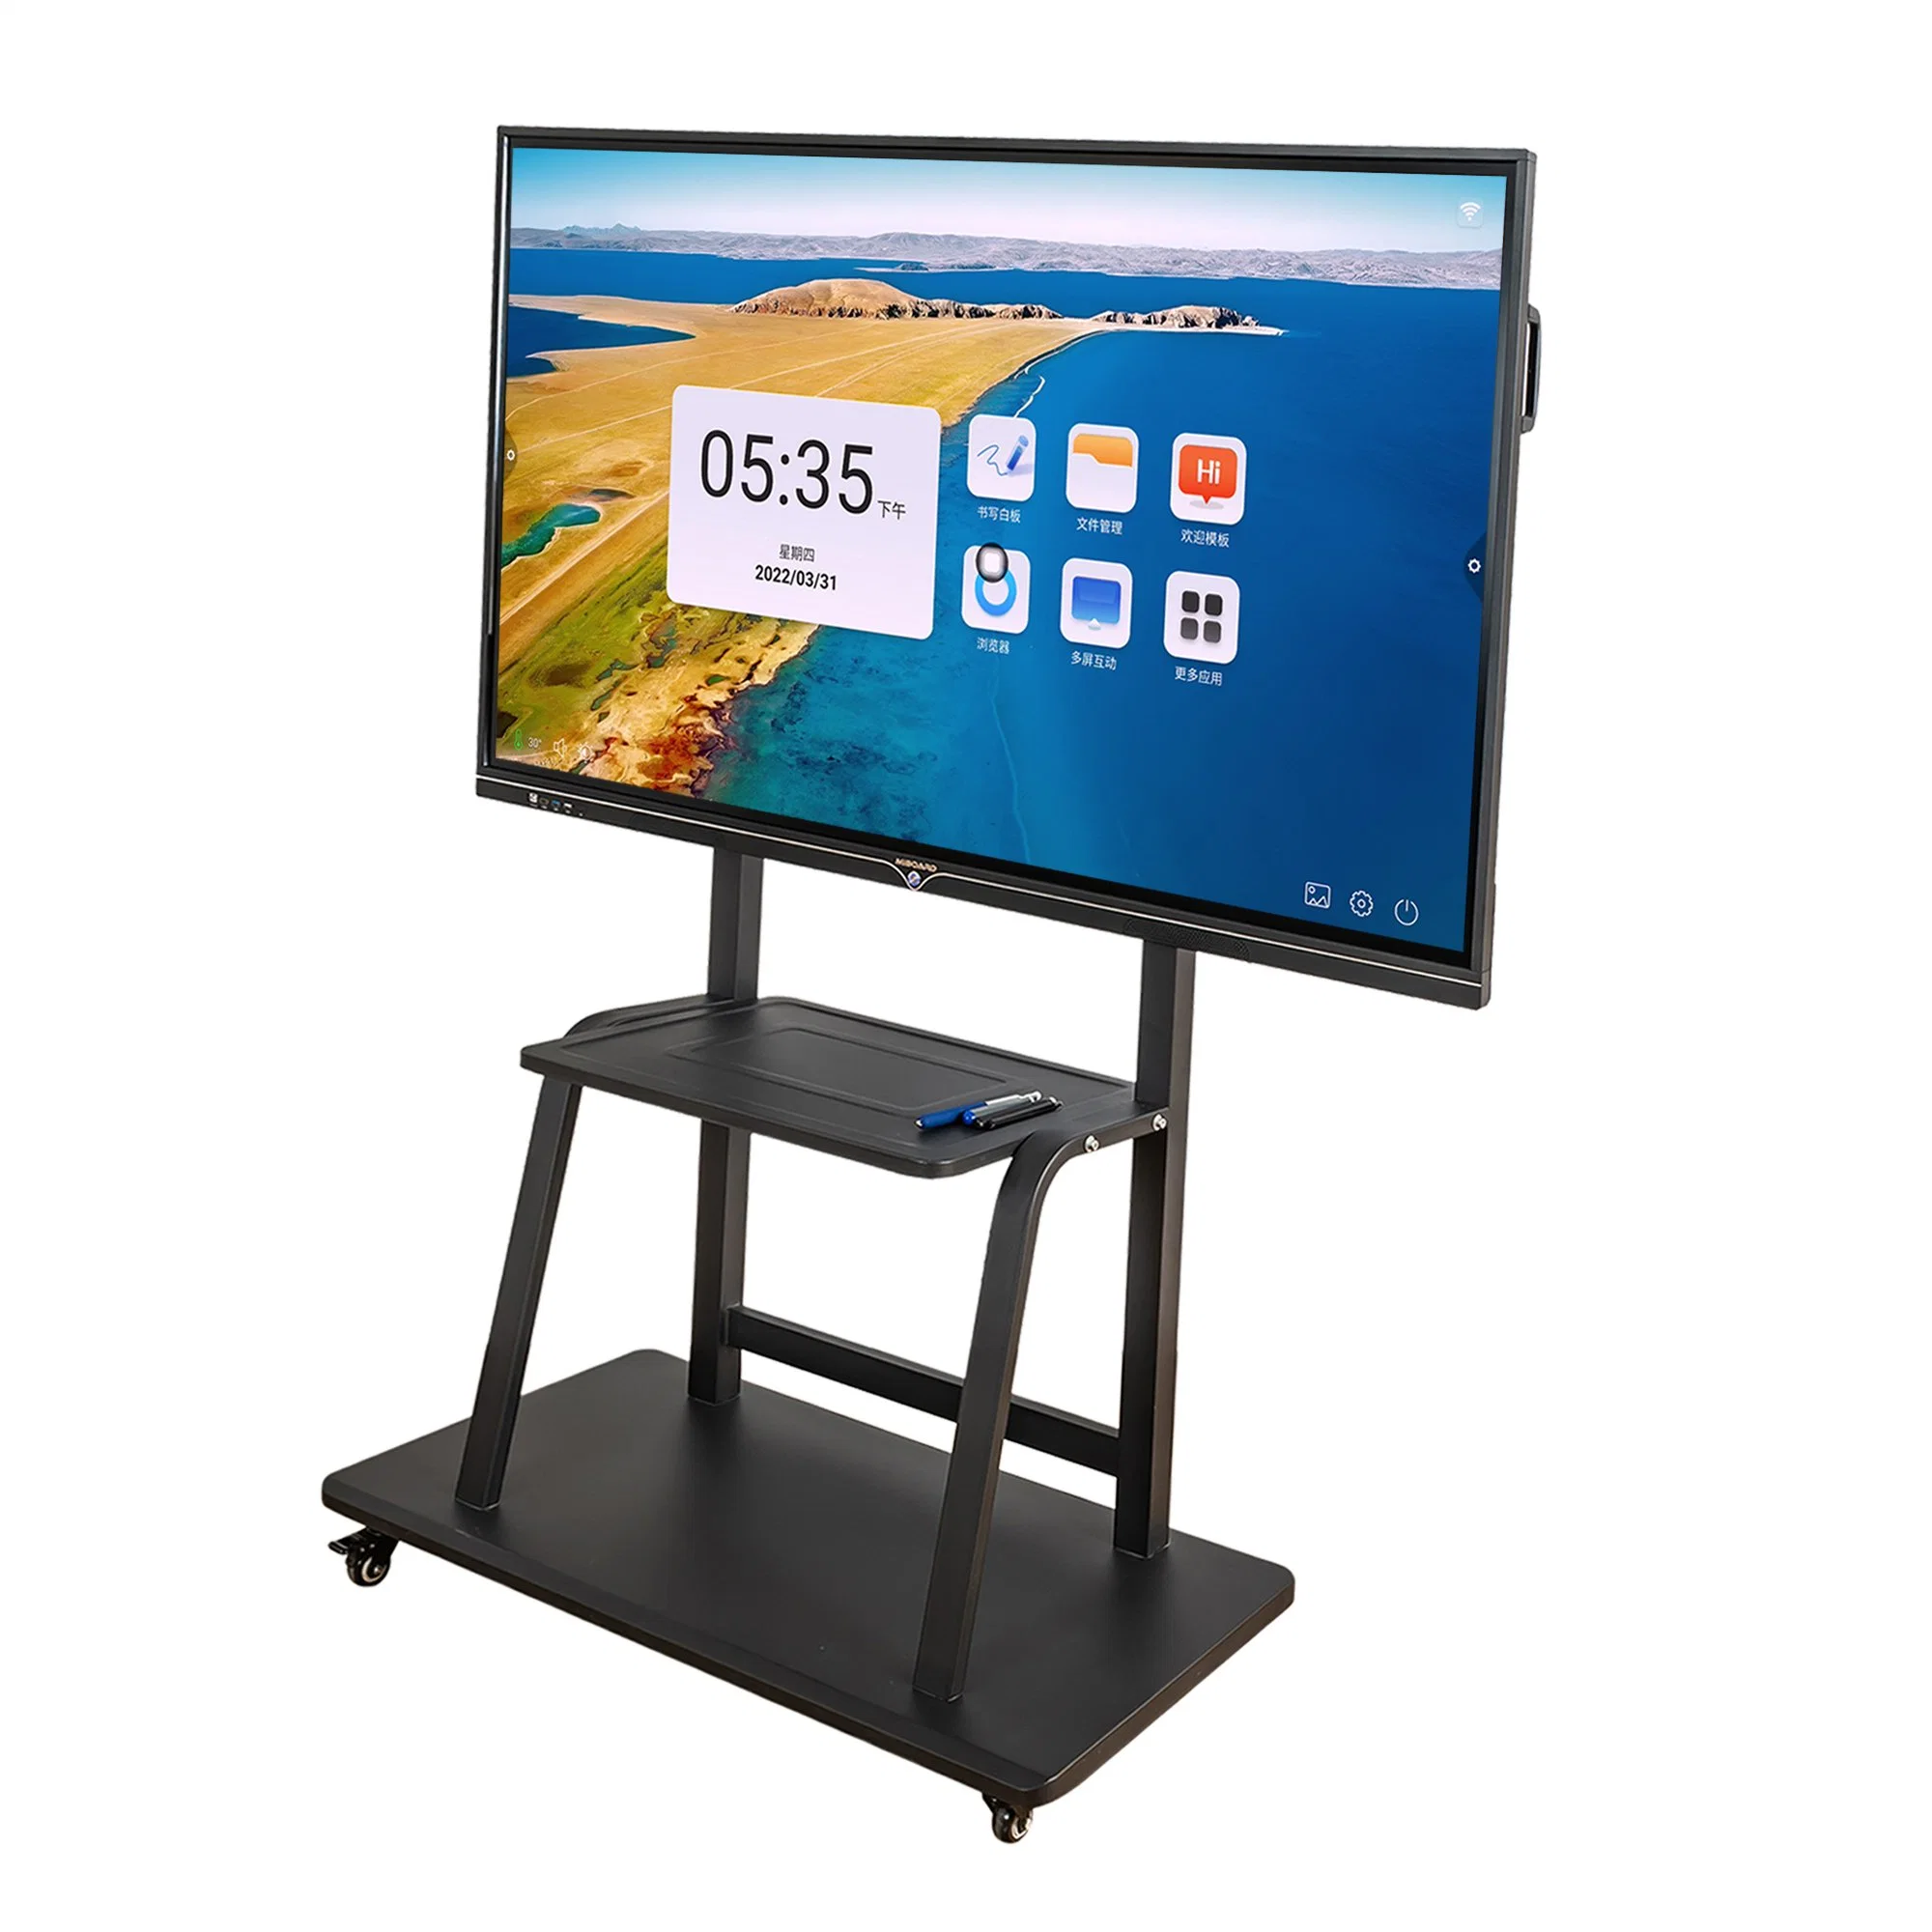 High-Quality LED Monitor 3840*2160 4K Finger Touch Interactive Whiteboard Meeting Interactive Flat Panel Teaching Smart Board 65, 75, 85, 86, 98 20 Points Touch